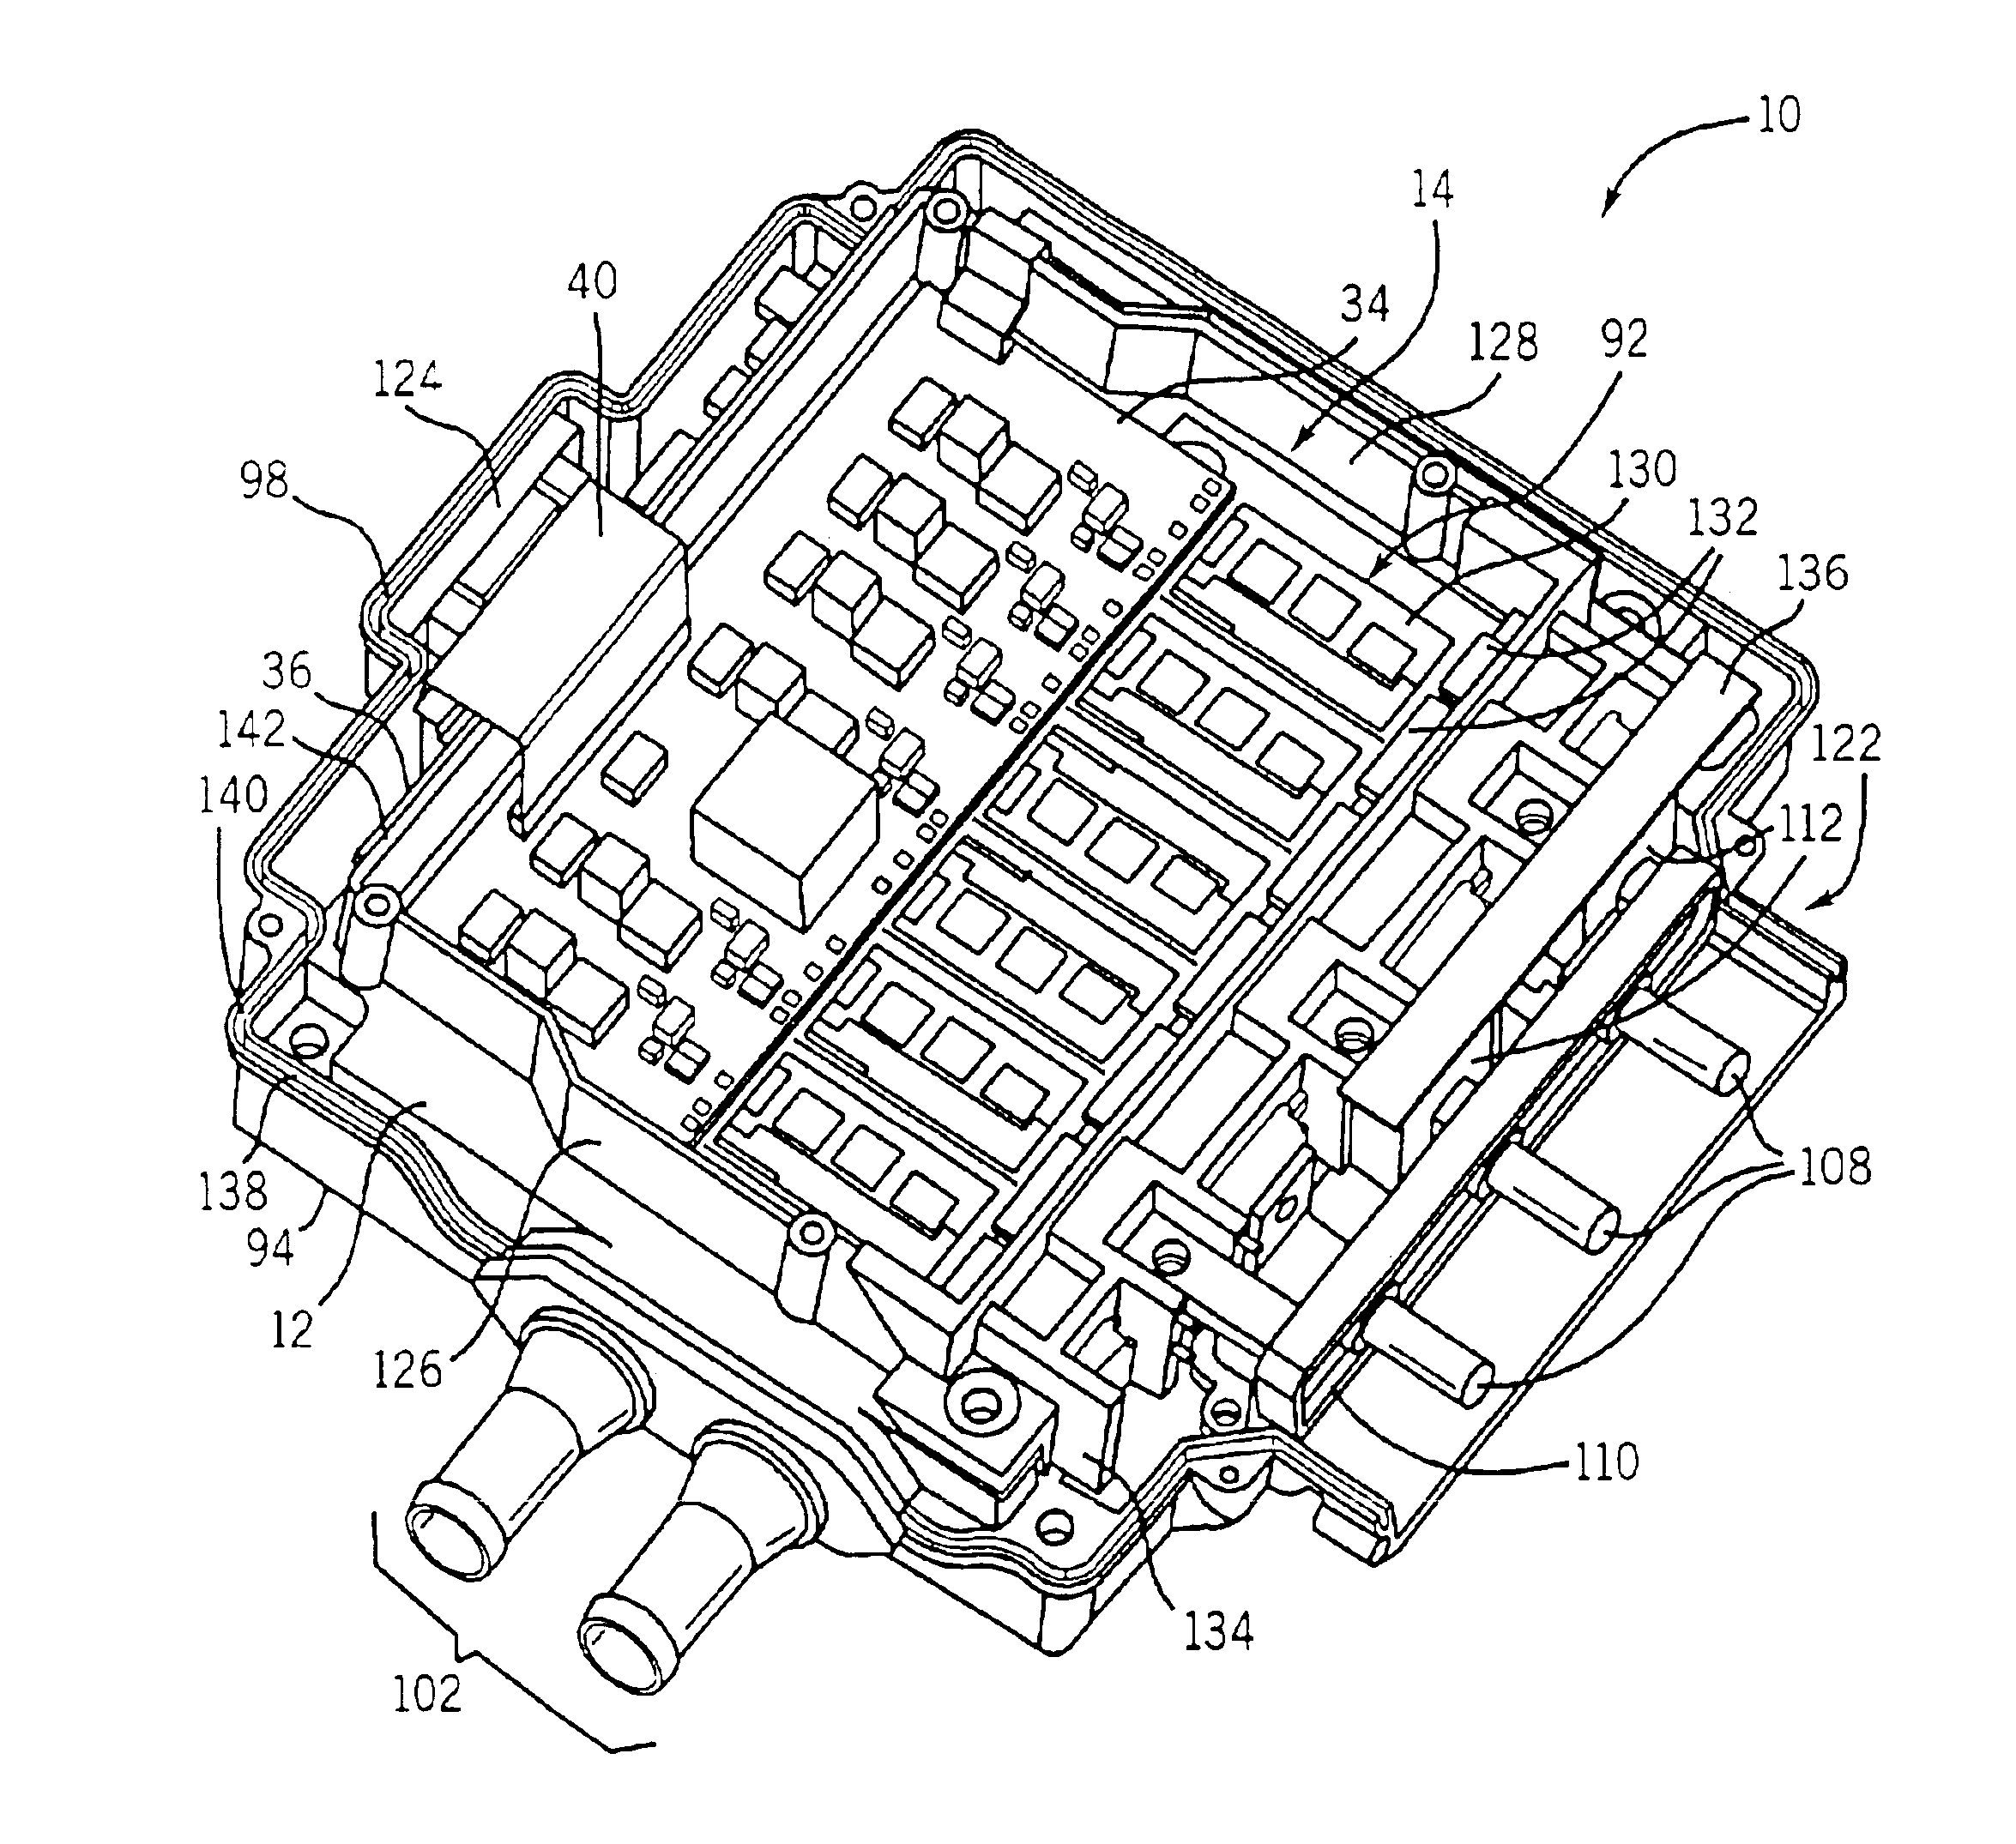 Thermally matched fluid cooled power converter